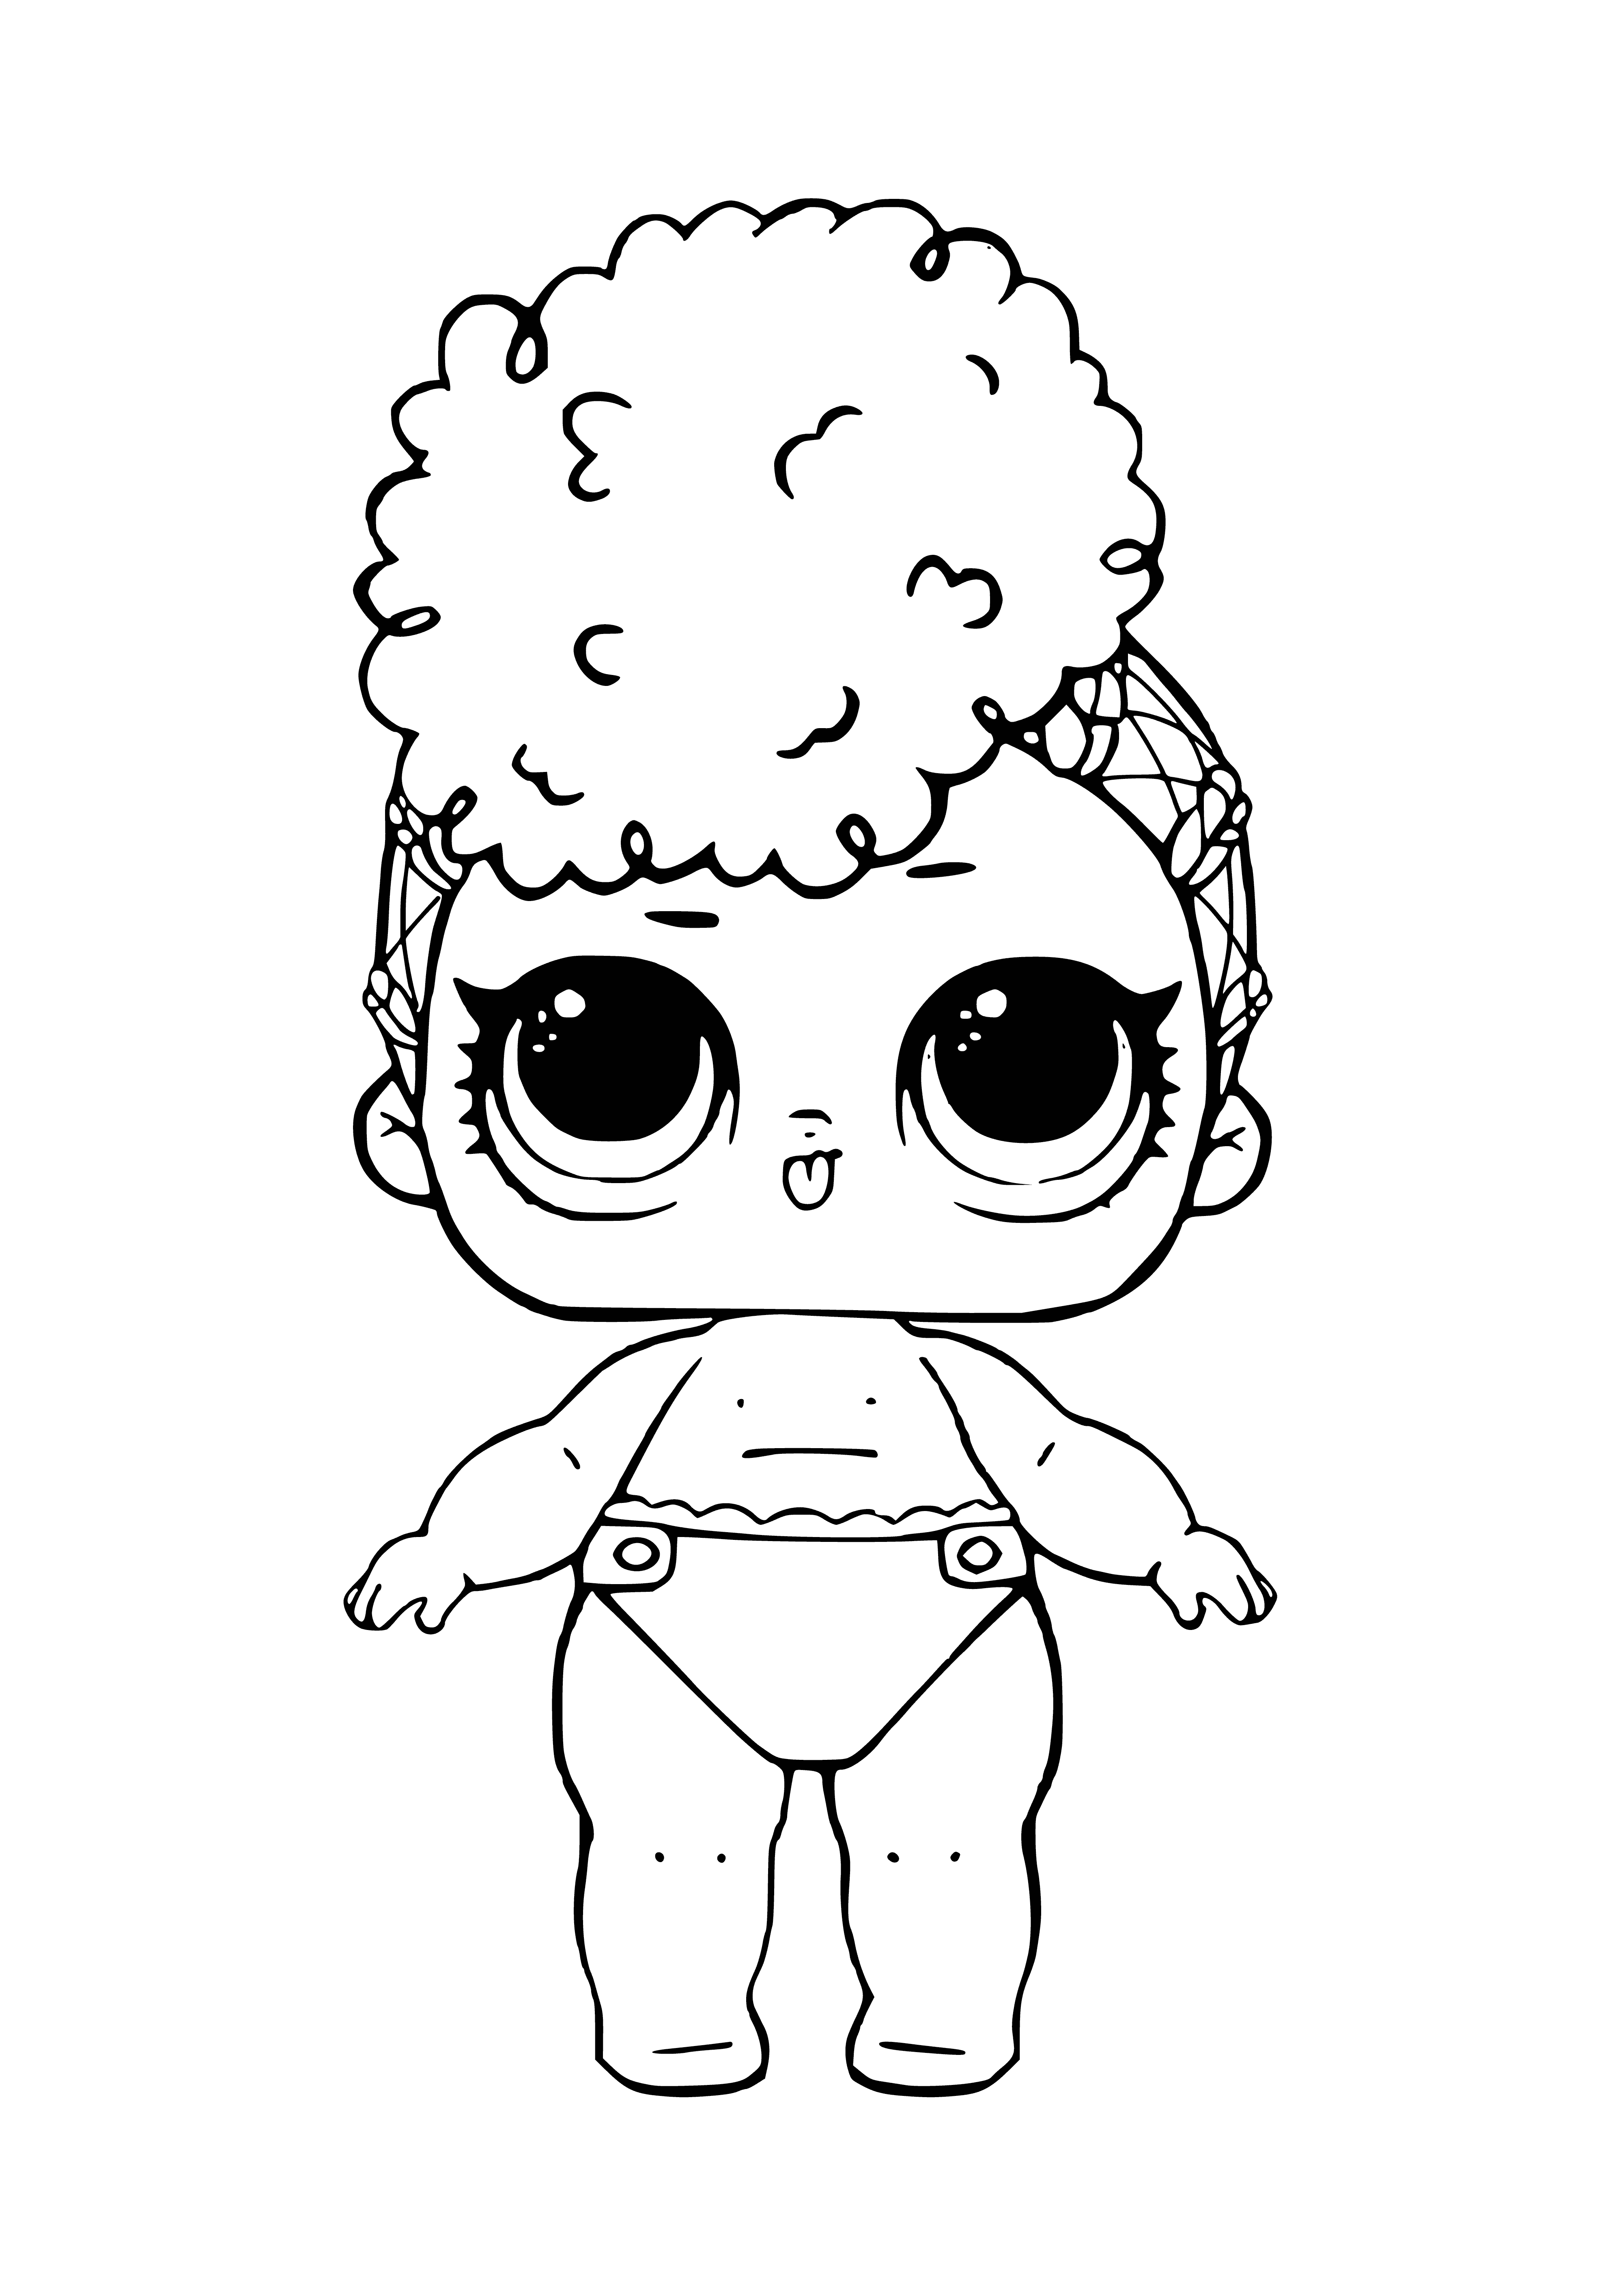 coloring page: Baby in middle of coloring page w/ blue shirt & pants, white/blue hat. Holding balloons & confetti. Says "LOL baby Independence" at bottom.